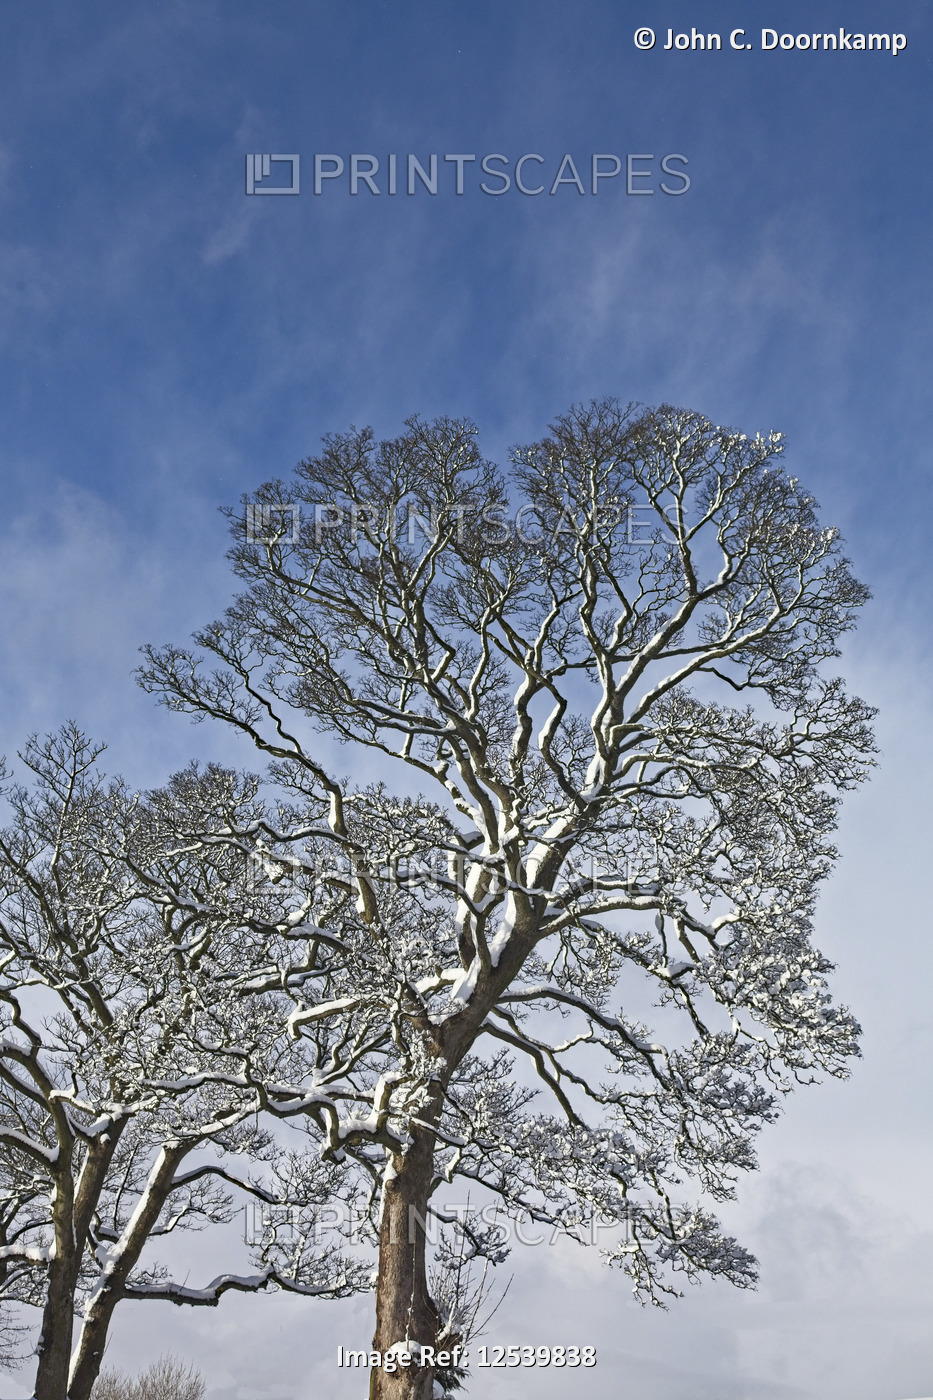 TREES IN SILHOUETTE CARRYING A COVERING OF SNOW AND SET AGAINST A SUNLIT SKY